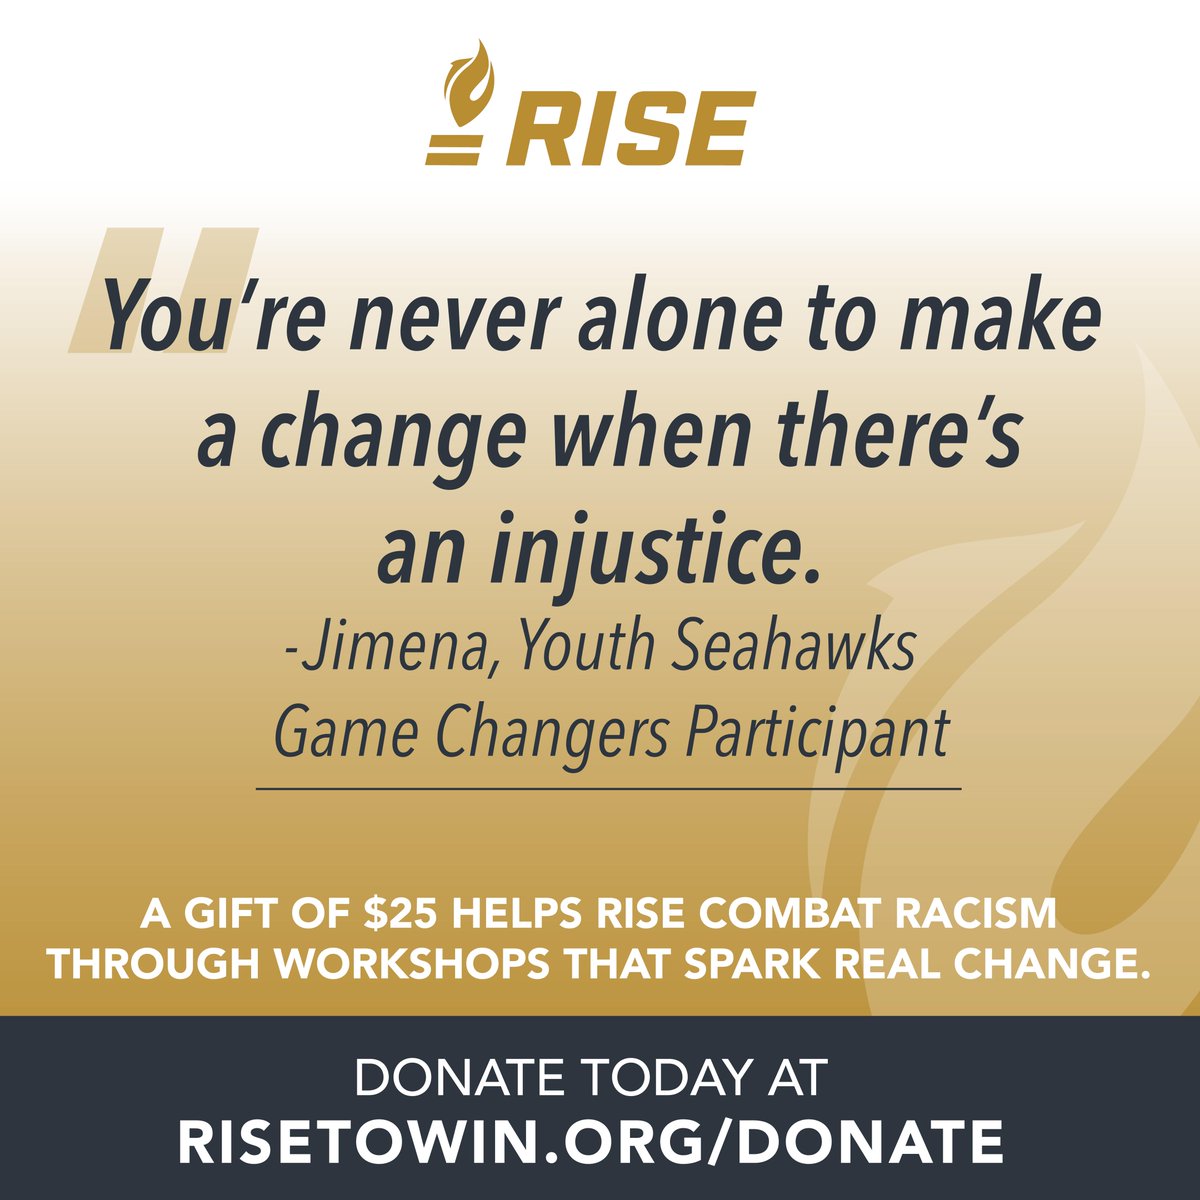 RISE works to unite our country and eliminate racial discrimination. Our efforts are needed today more than ever, and the time to act is now. To address it requires all of us to RISE up and take action. Donate today in honor of Giving Tuesday at RISEtoWin.org/Conate